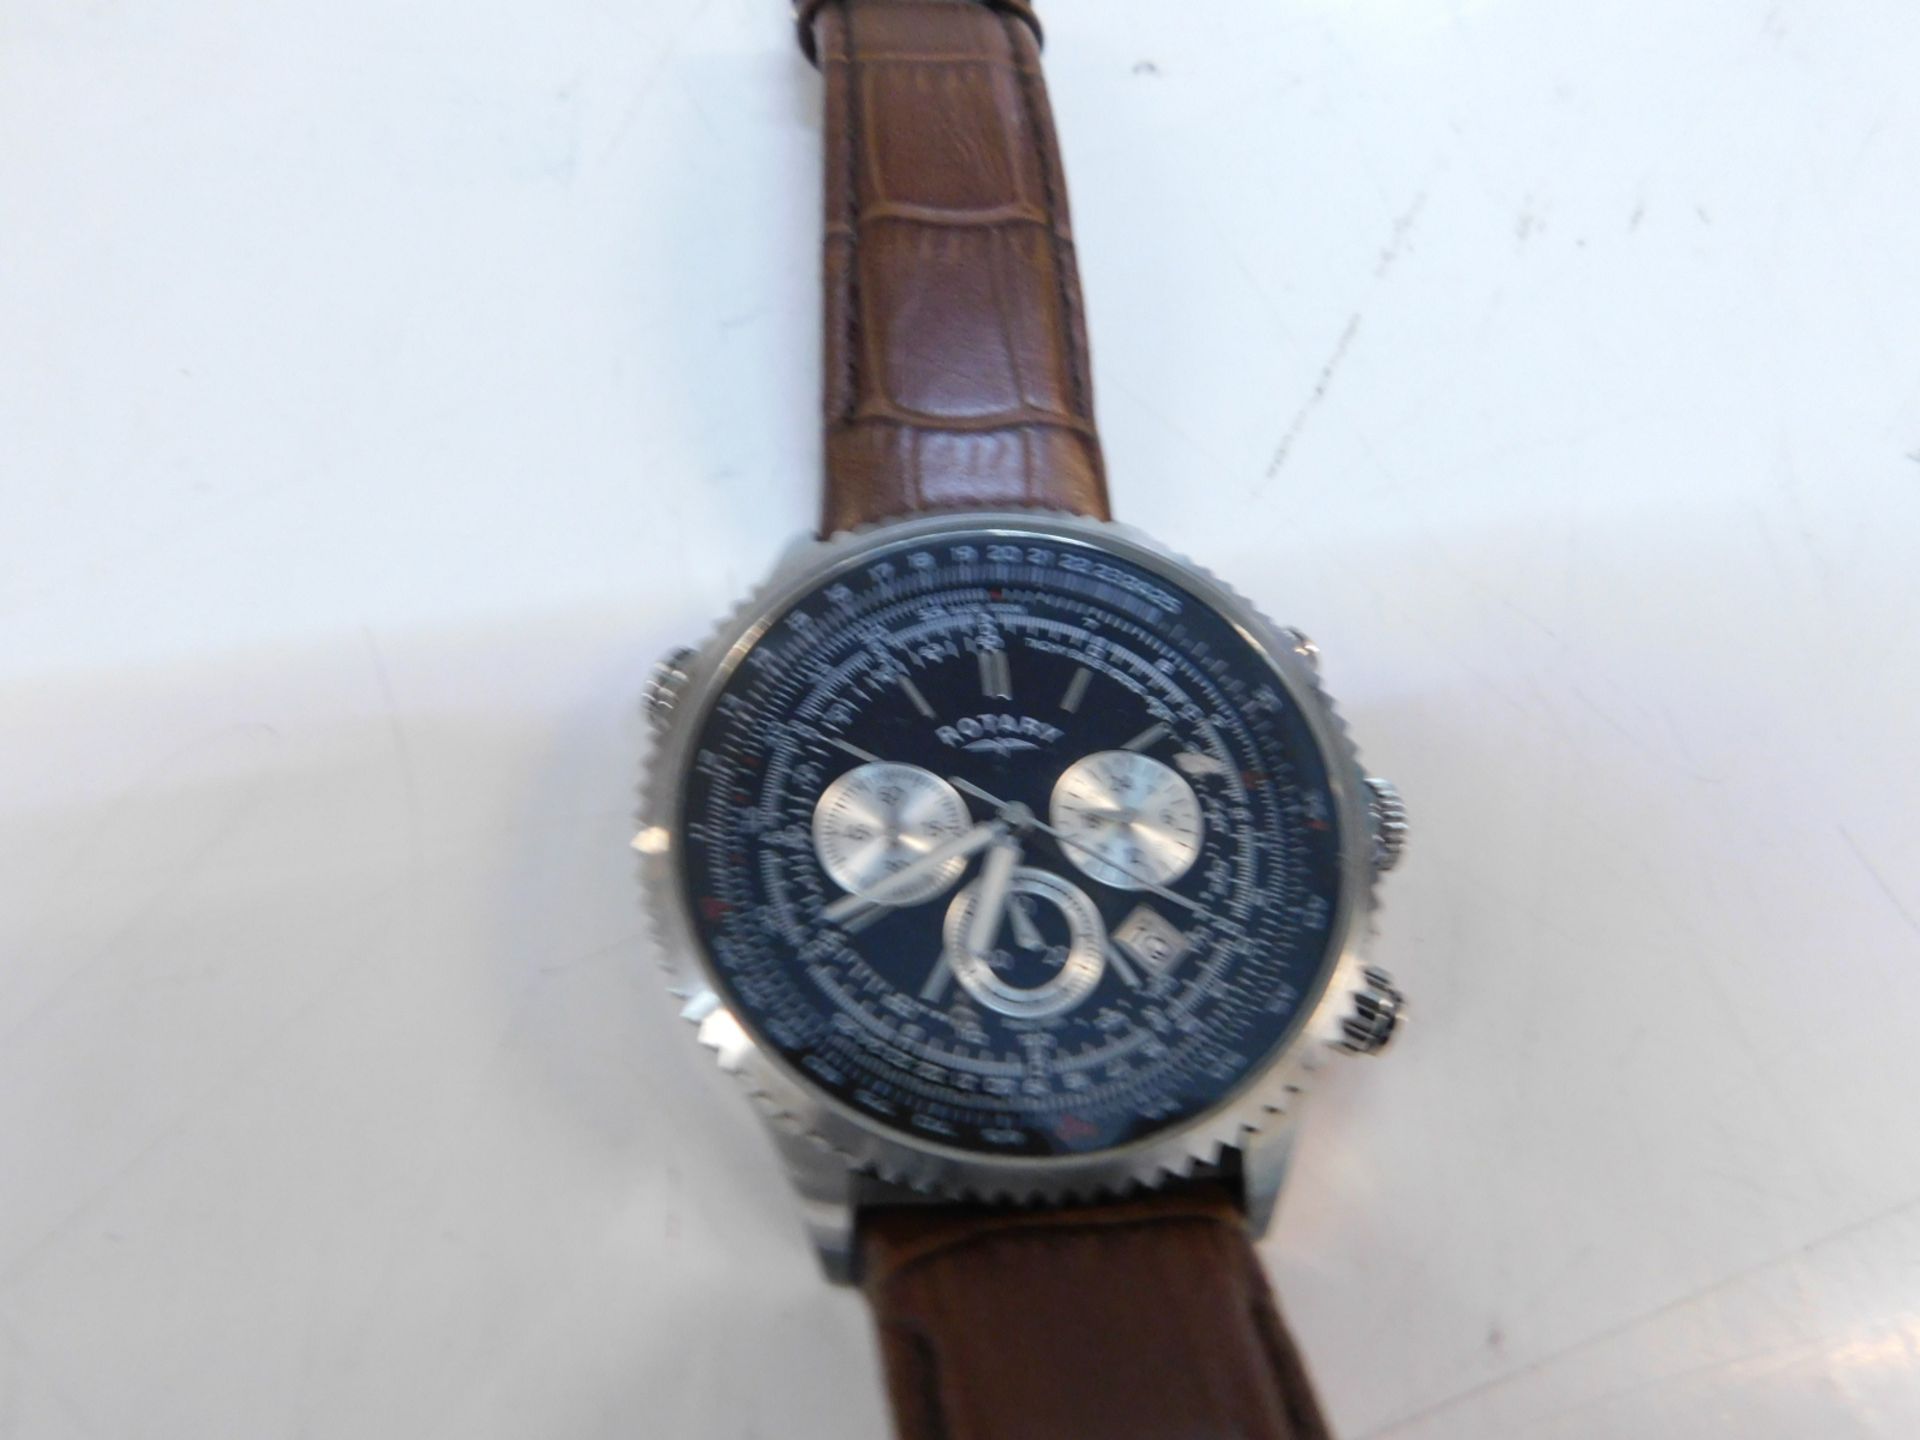 1 ROTARY GENTS CHRONOGRAPH WATCH MODEL GS00100/04/BRN RRP £199